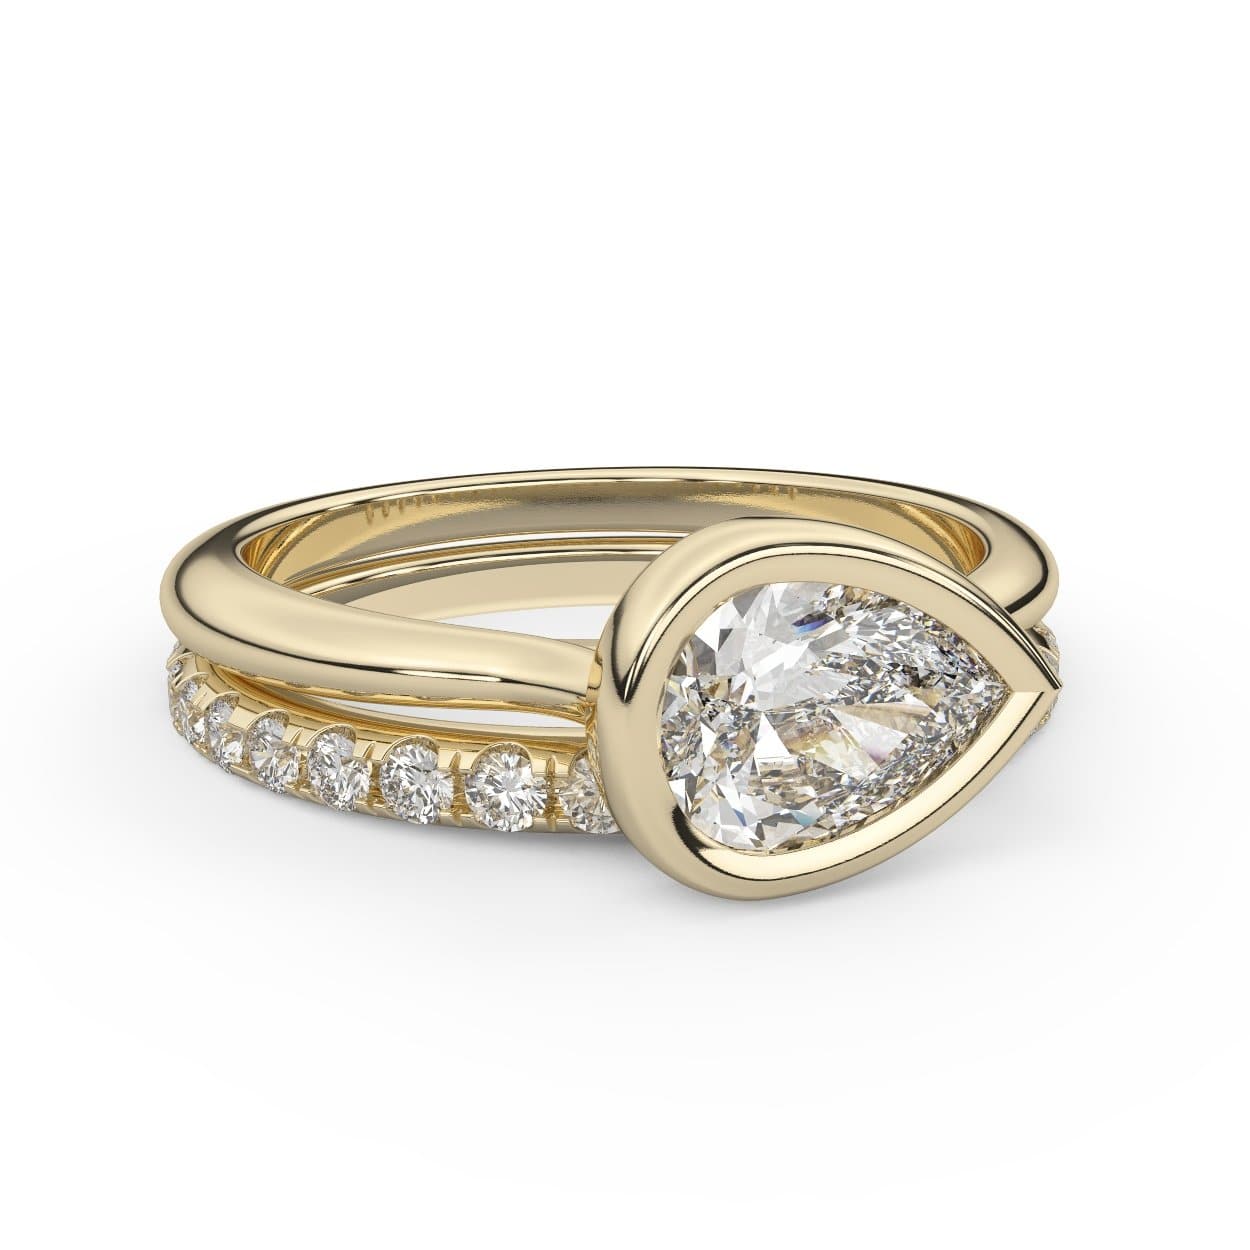 East West Pear Bezel Diamond & Pave Band Wedding Set in 14k Gold